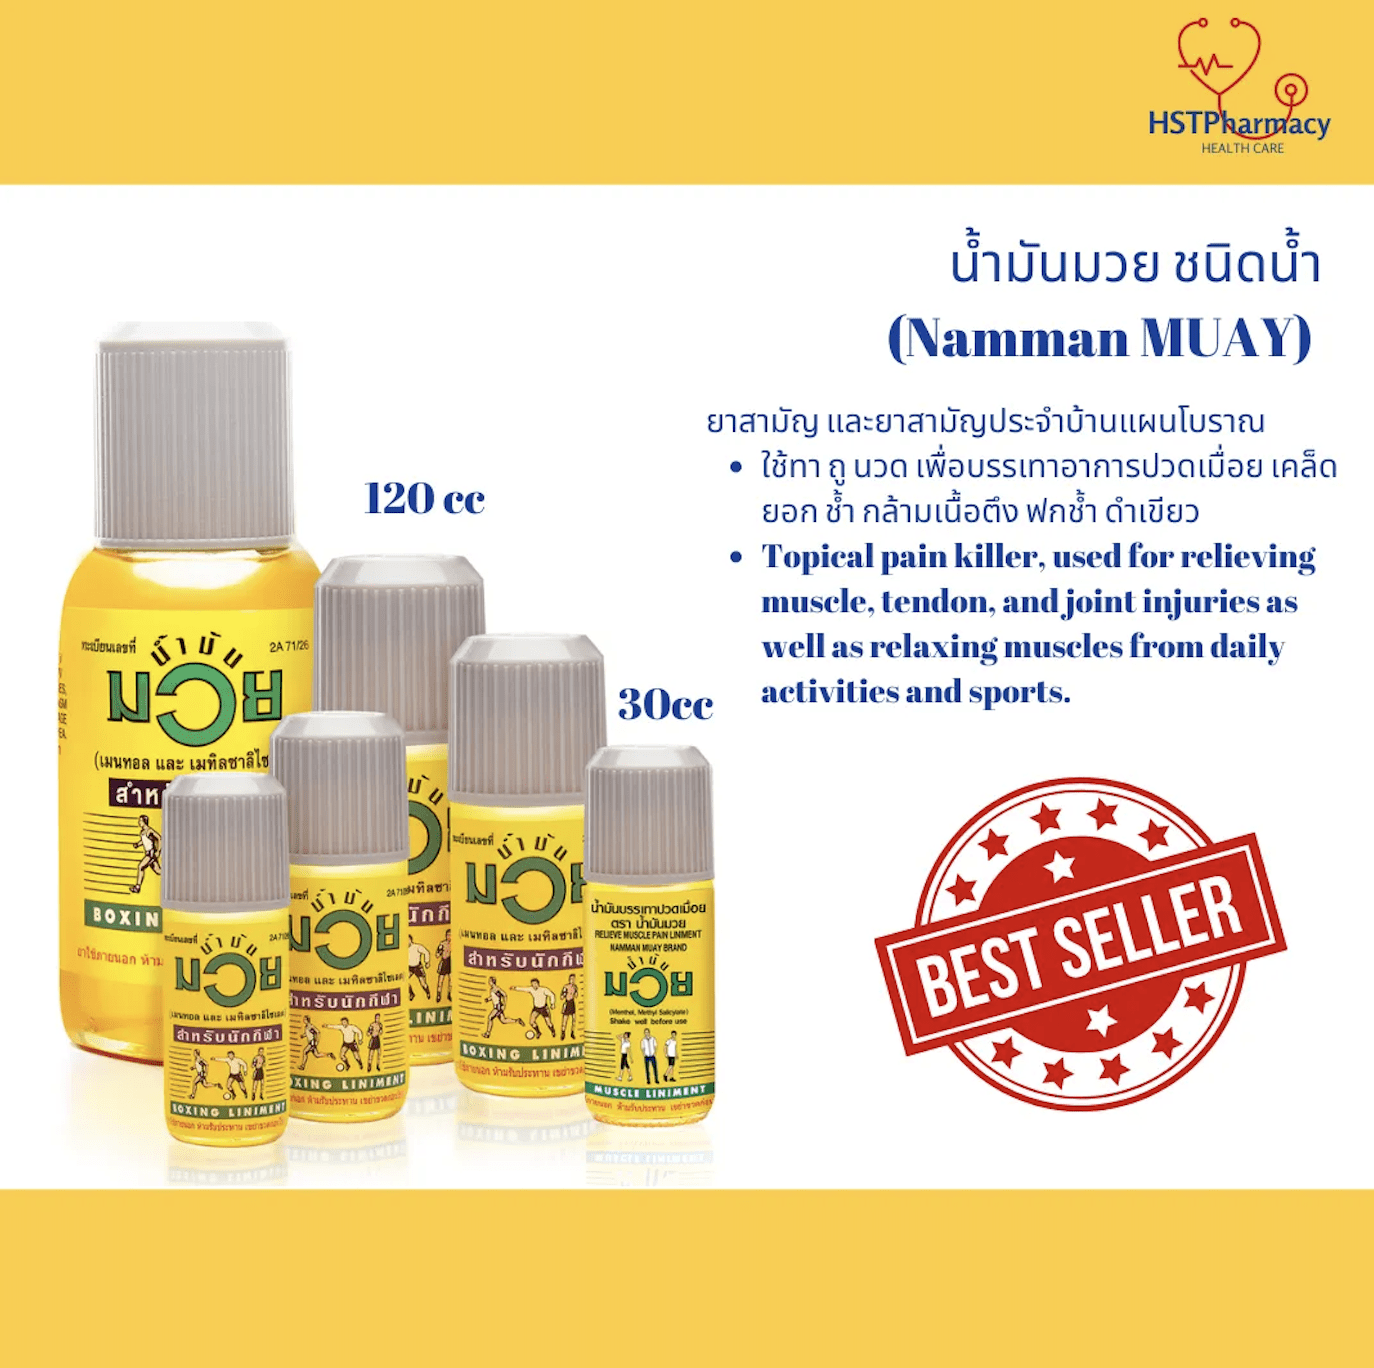 Namman Muay Thai Boxing Liniment oil - Buy online in Doctor Thailand store